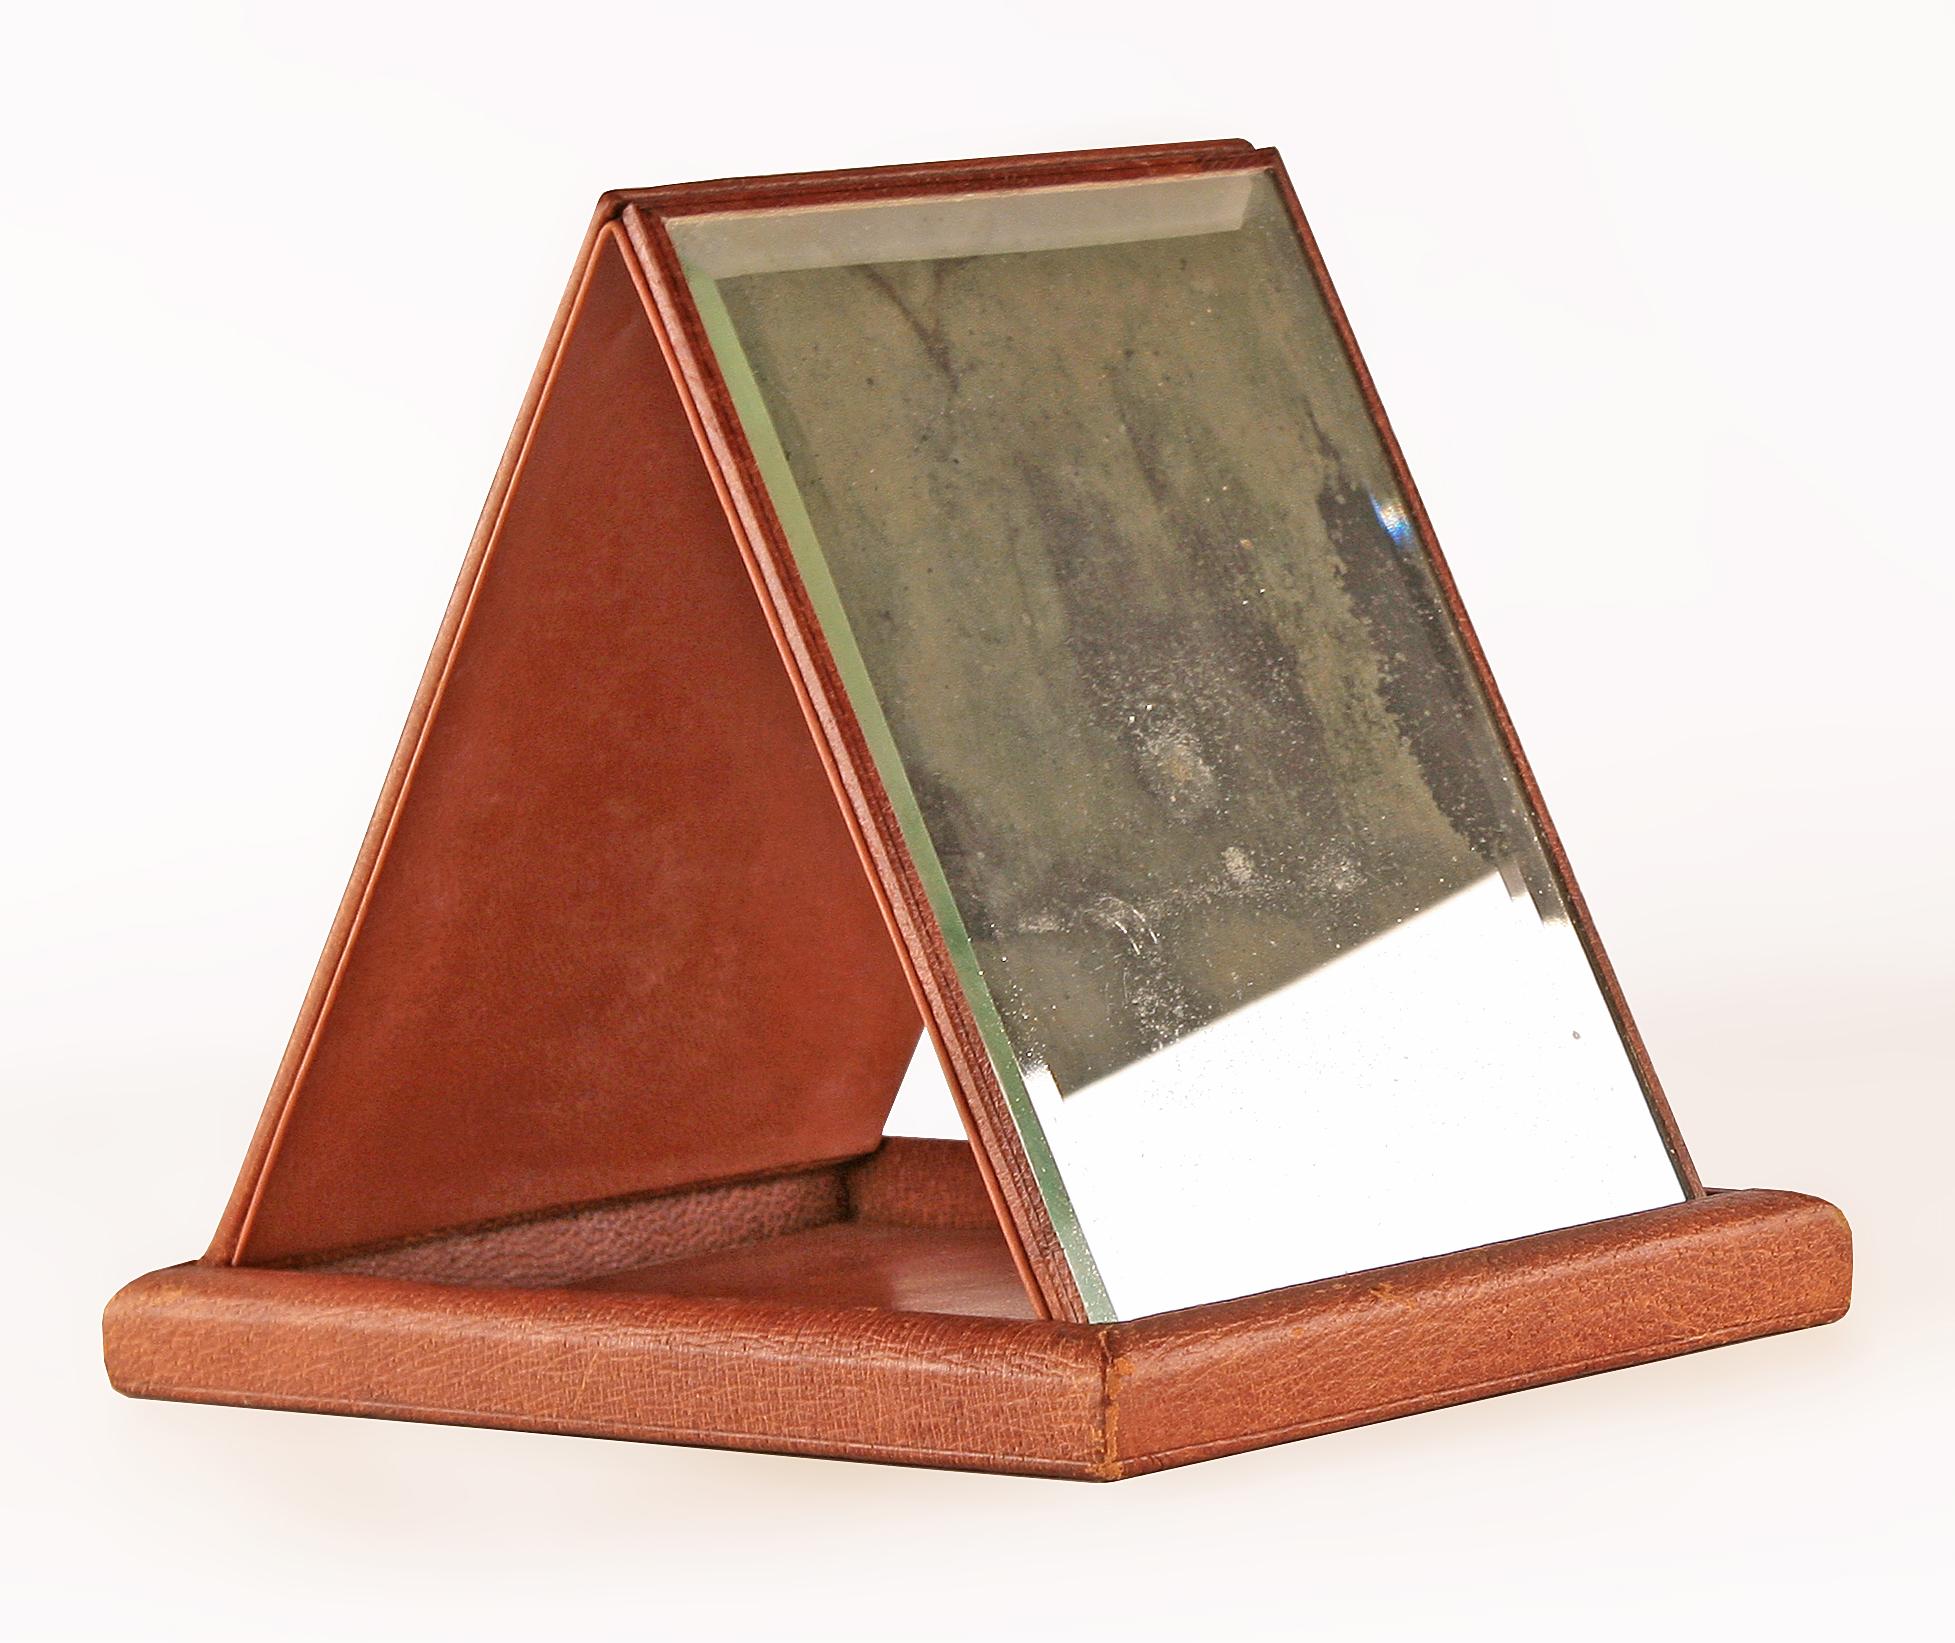 20th century leather and wood foldable beveled mirror by french luxury design house Hermès Paris

By: Hermès Paris
Material: glass, leather, wood, mirror
Technique: embossed, polished, hand-crafted, carved, hand-carved
Dimensions: 8.5 in x 6 in x 1